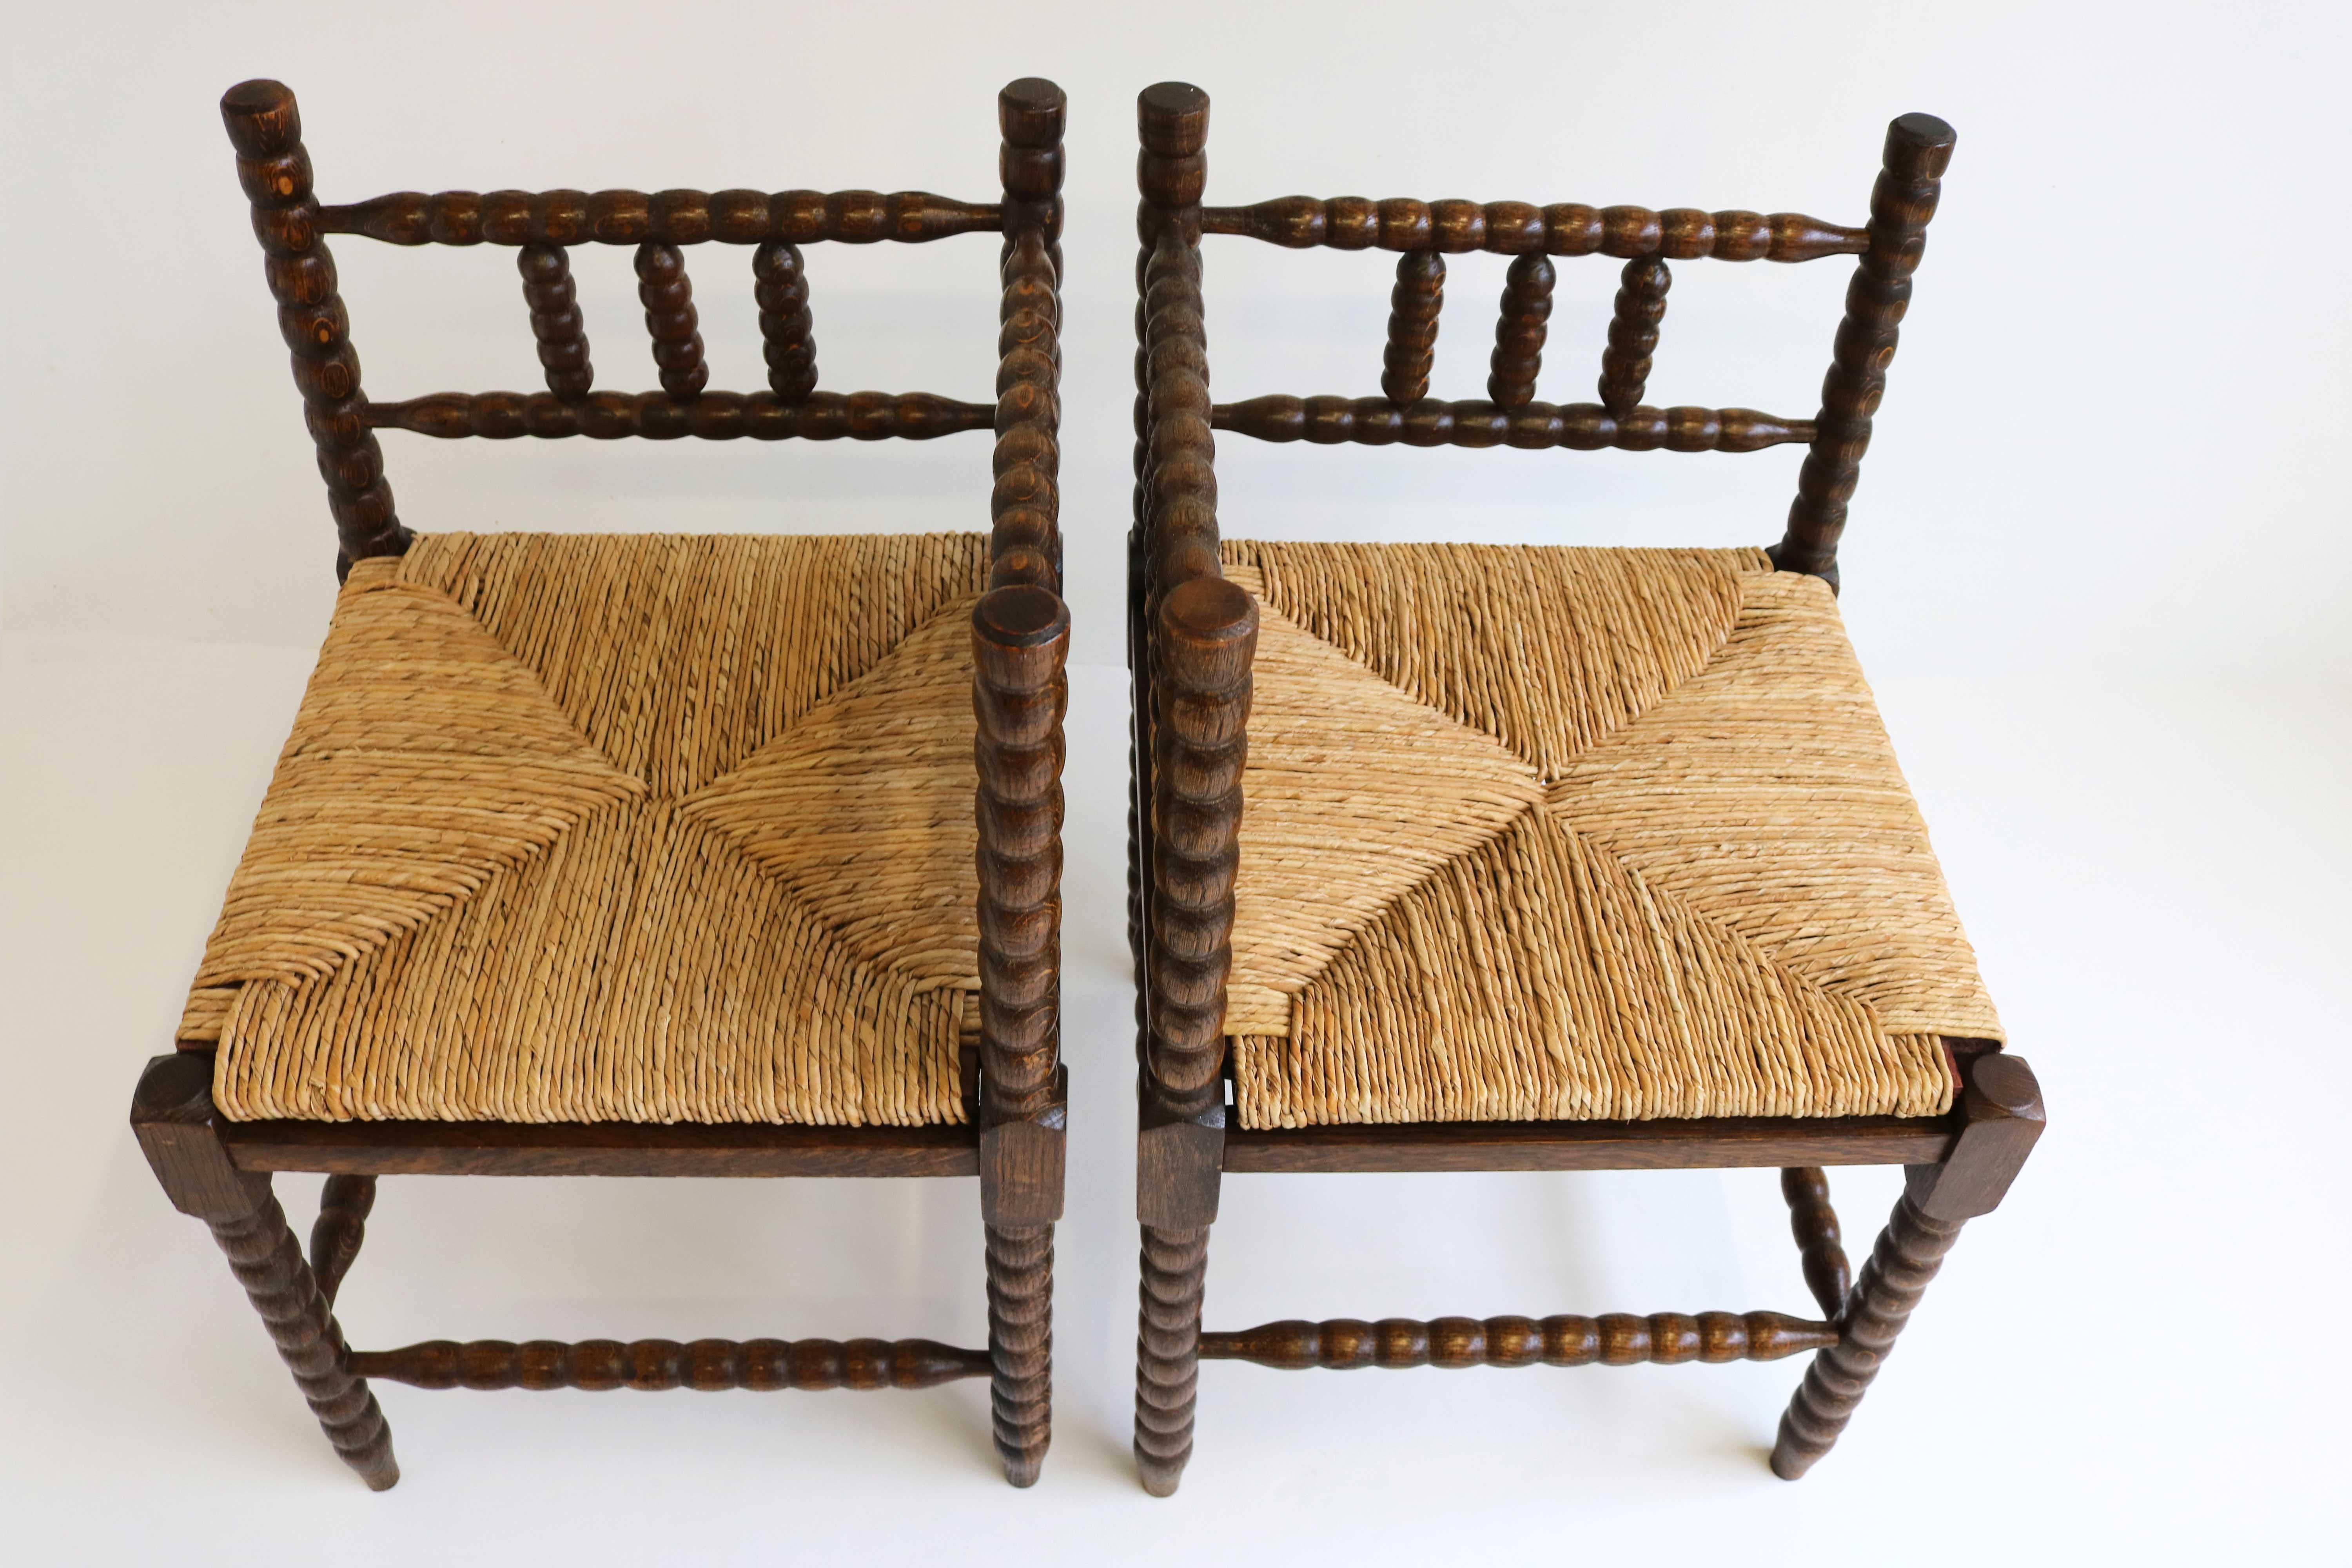 Country Couple Antique Dutch Ruch-Seat Oak Corner Bobbin Chairs Turned Hand Crafted 1900